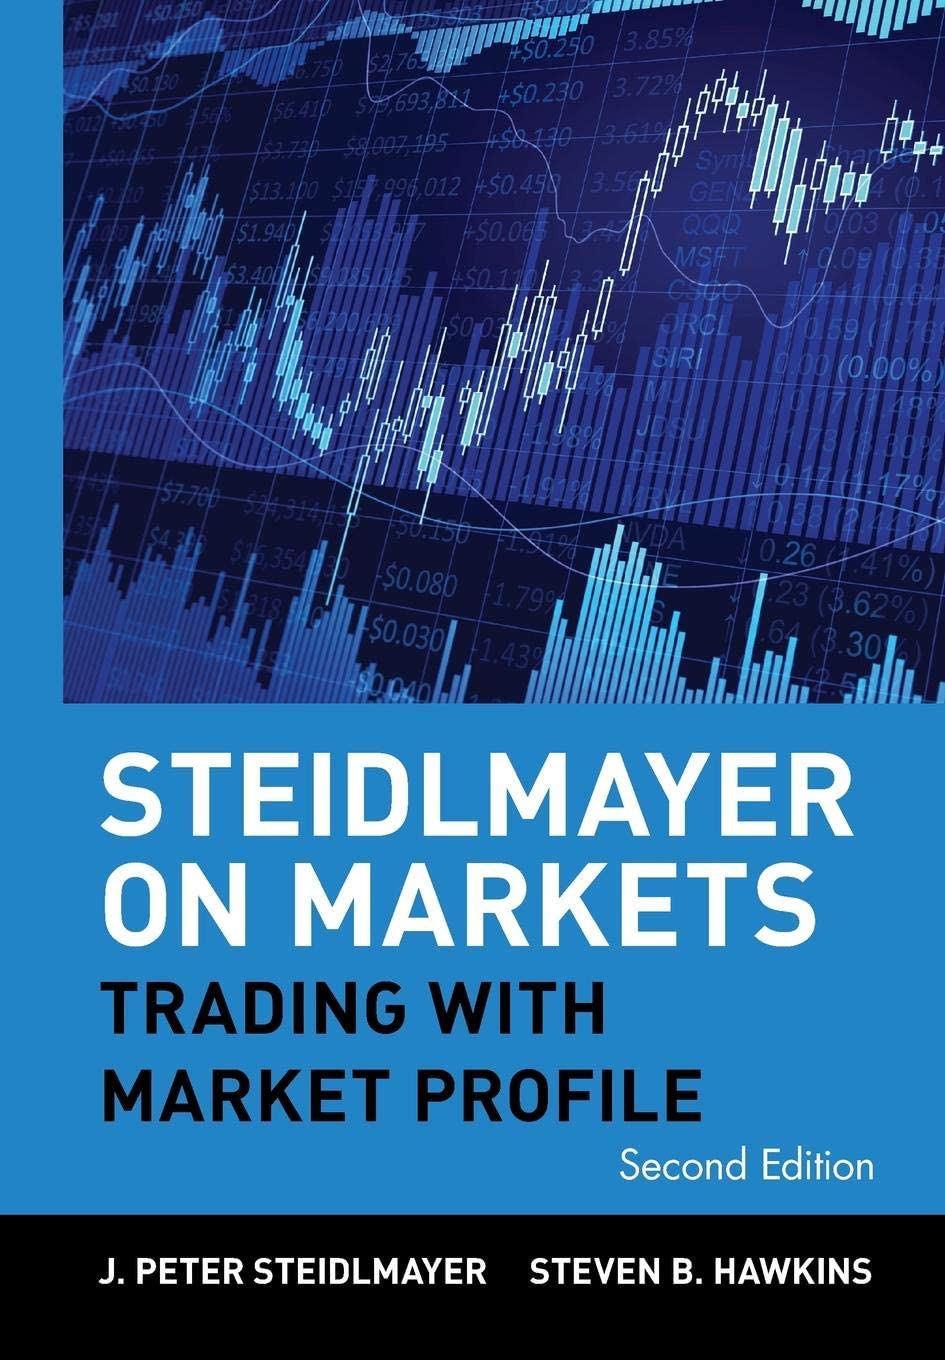 Steidlmayer on Markets: Trading with Market Profile, 2nd Edition